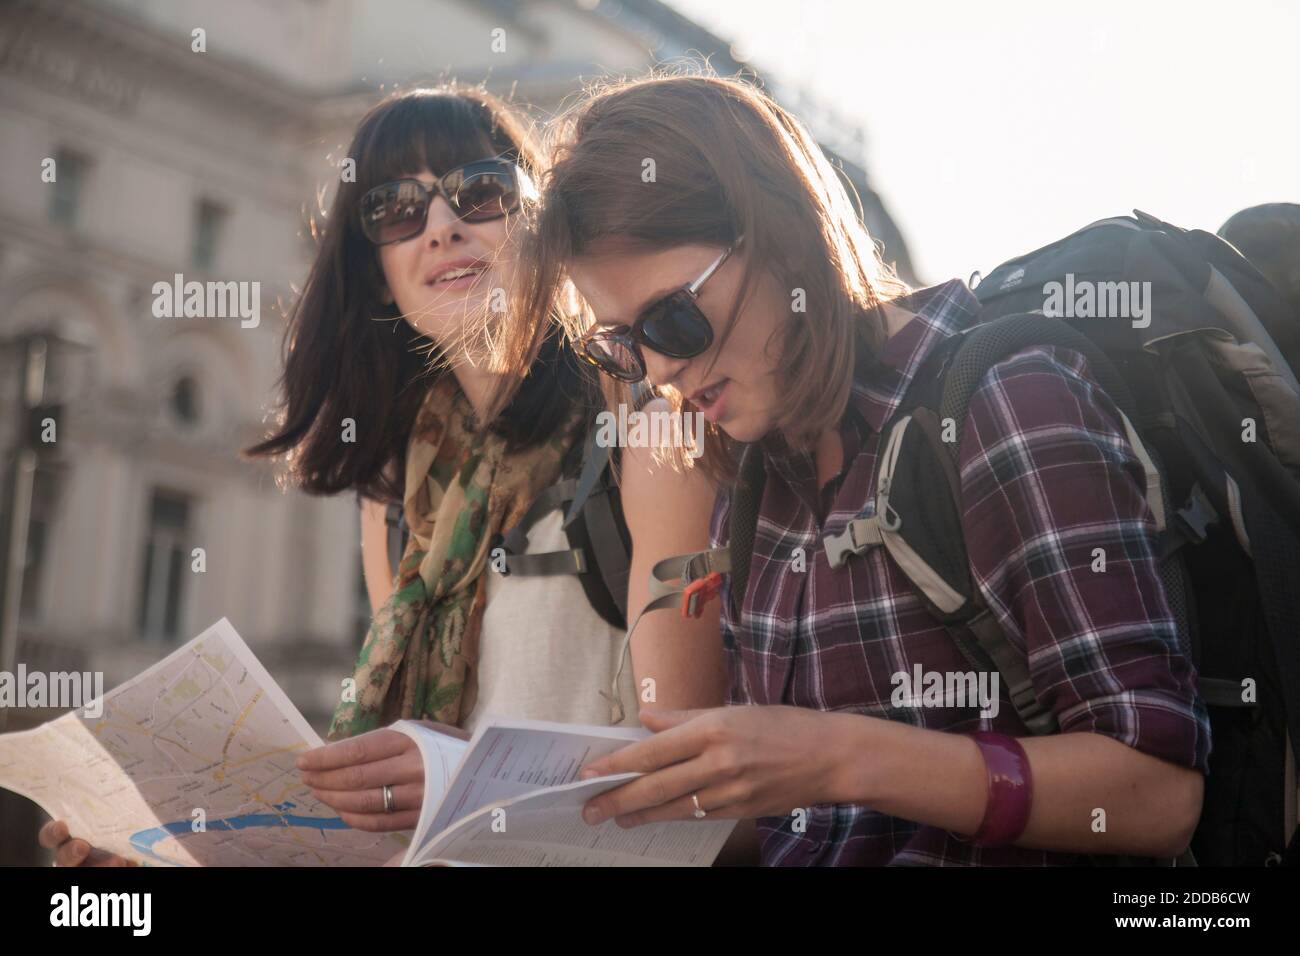 Women on vacation reading map while sitting at town square Stock Photo